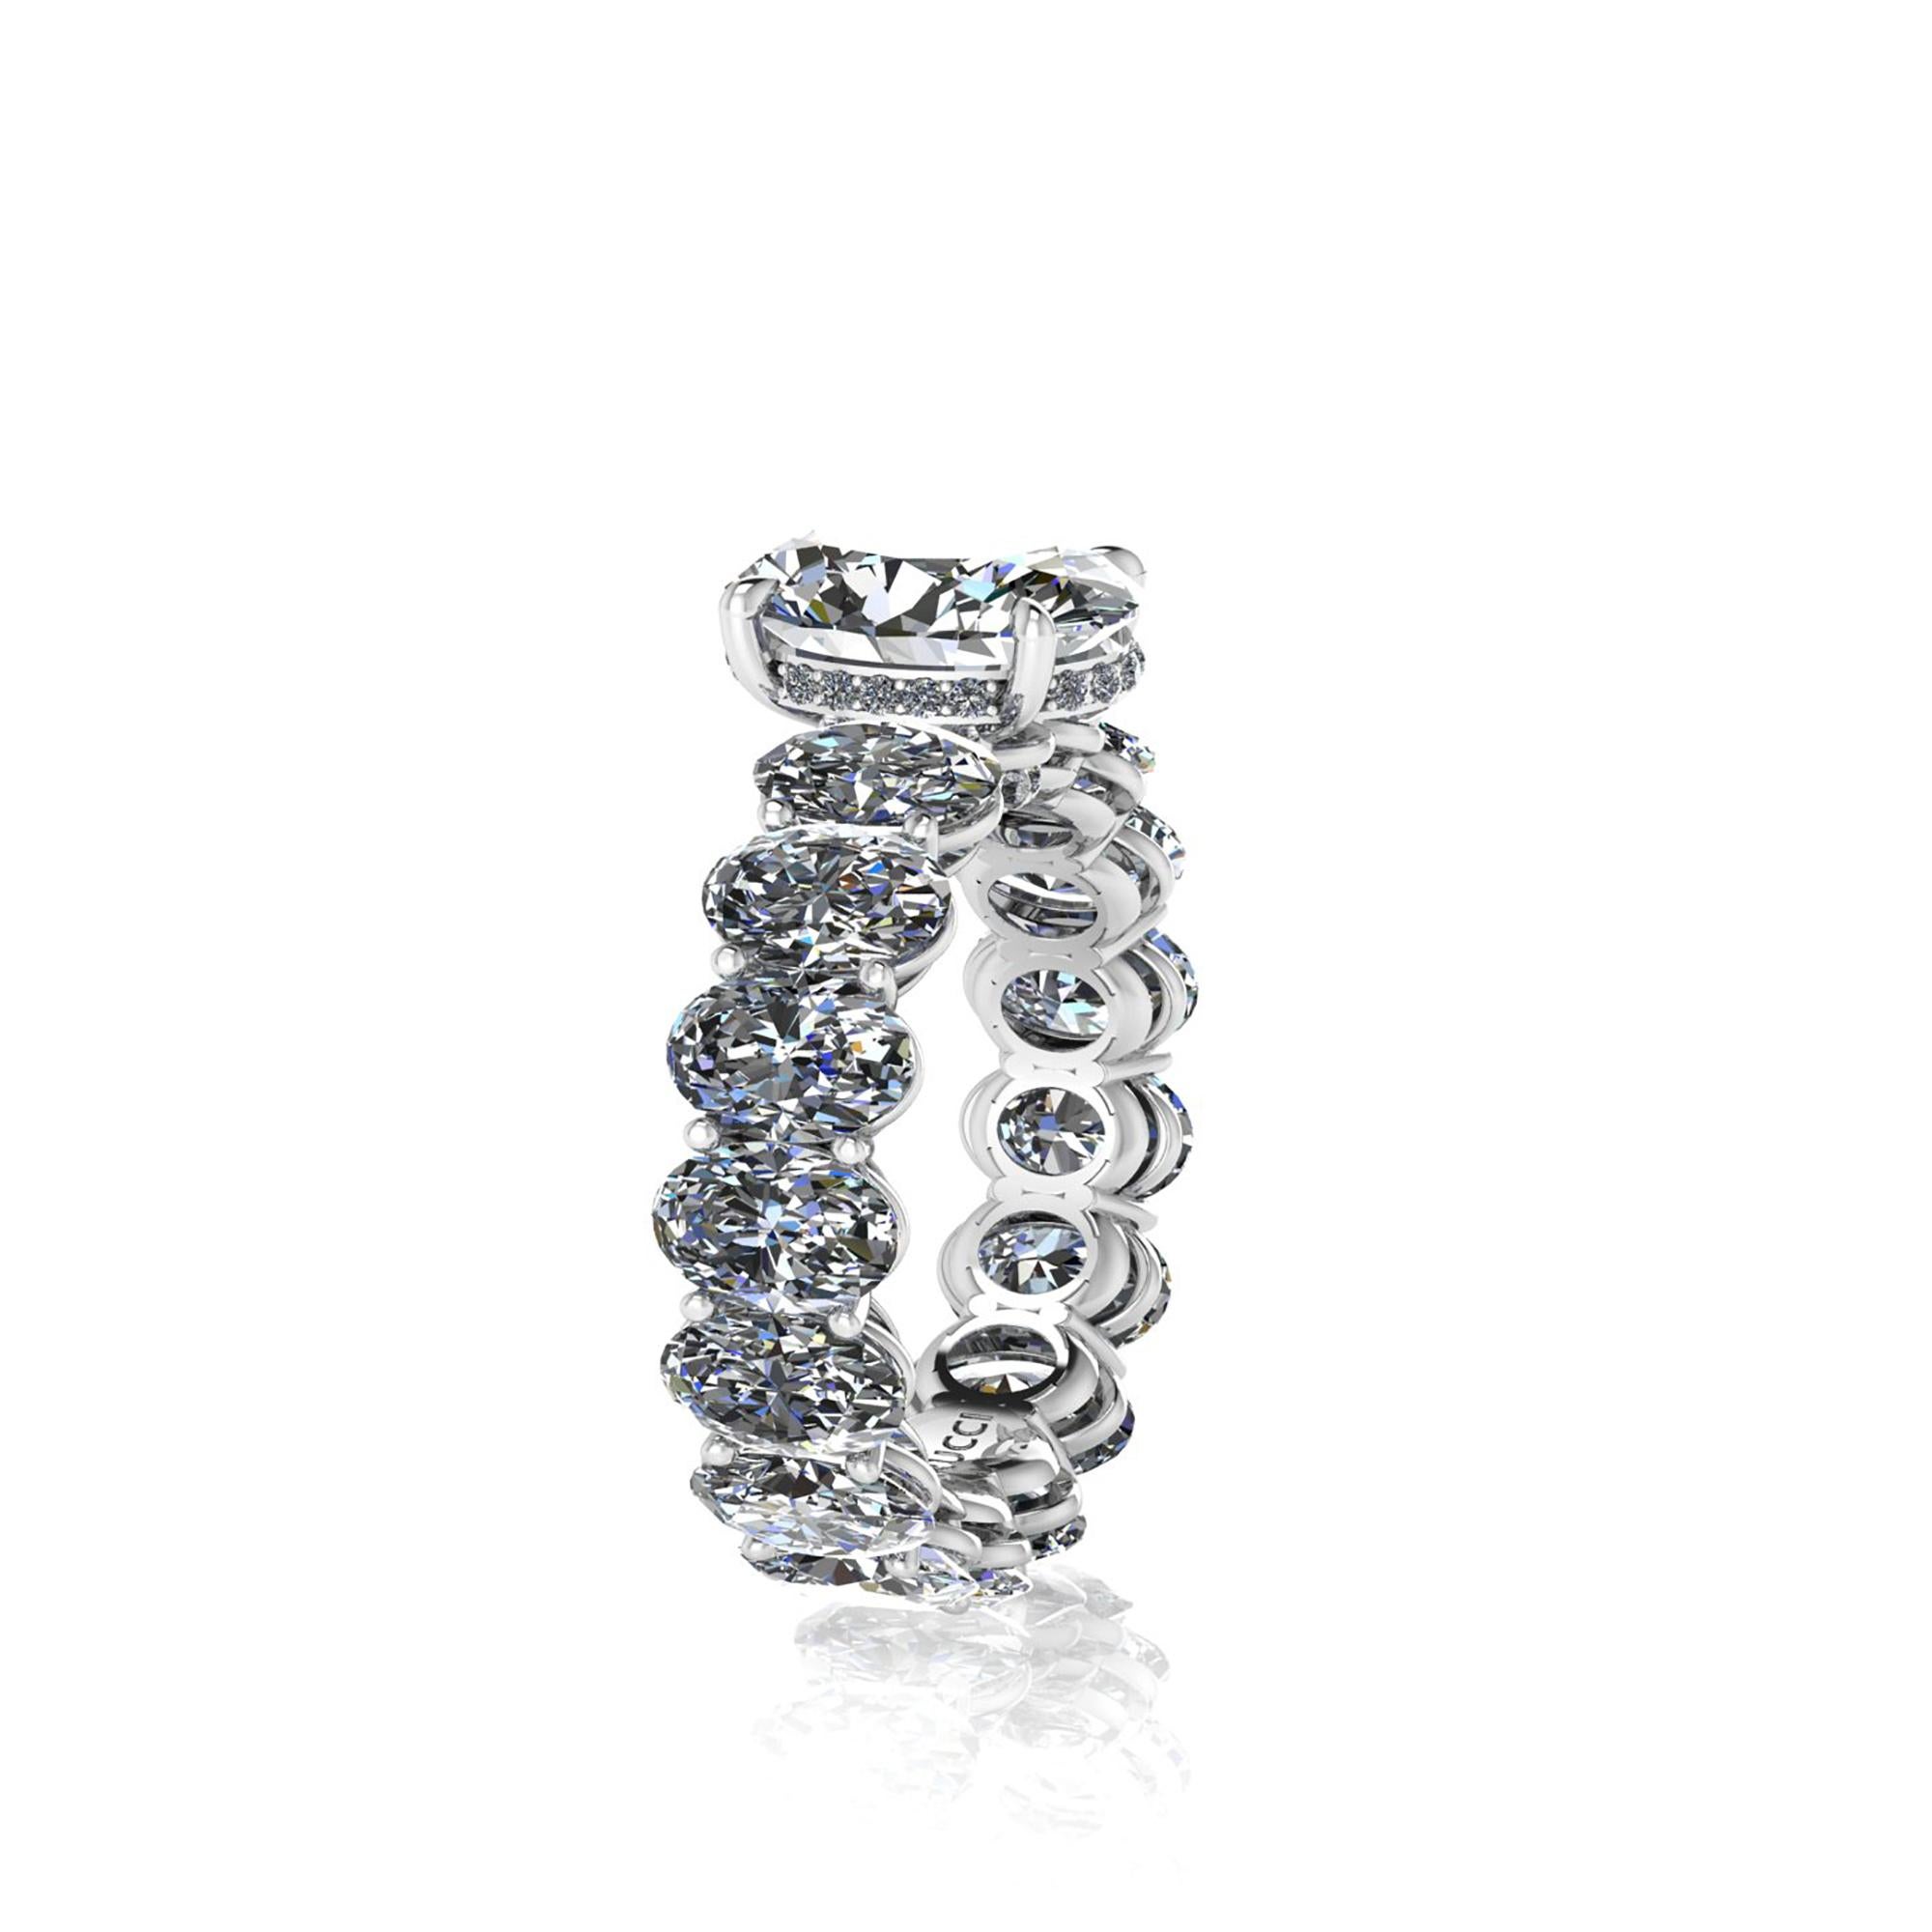 GIA Certified 2.50 Carat Oval diamond, F color, VS1 clarity, Triple Excellent Cut, Symmetry and Polish, set on a Platinum 950, Oval diamond eternity ring, designed and hand made in New York with the gem adorned by pave of white round diamonds, for a